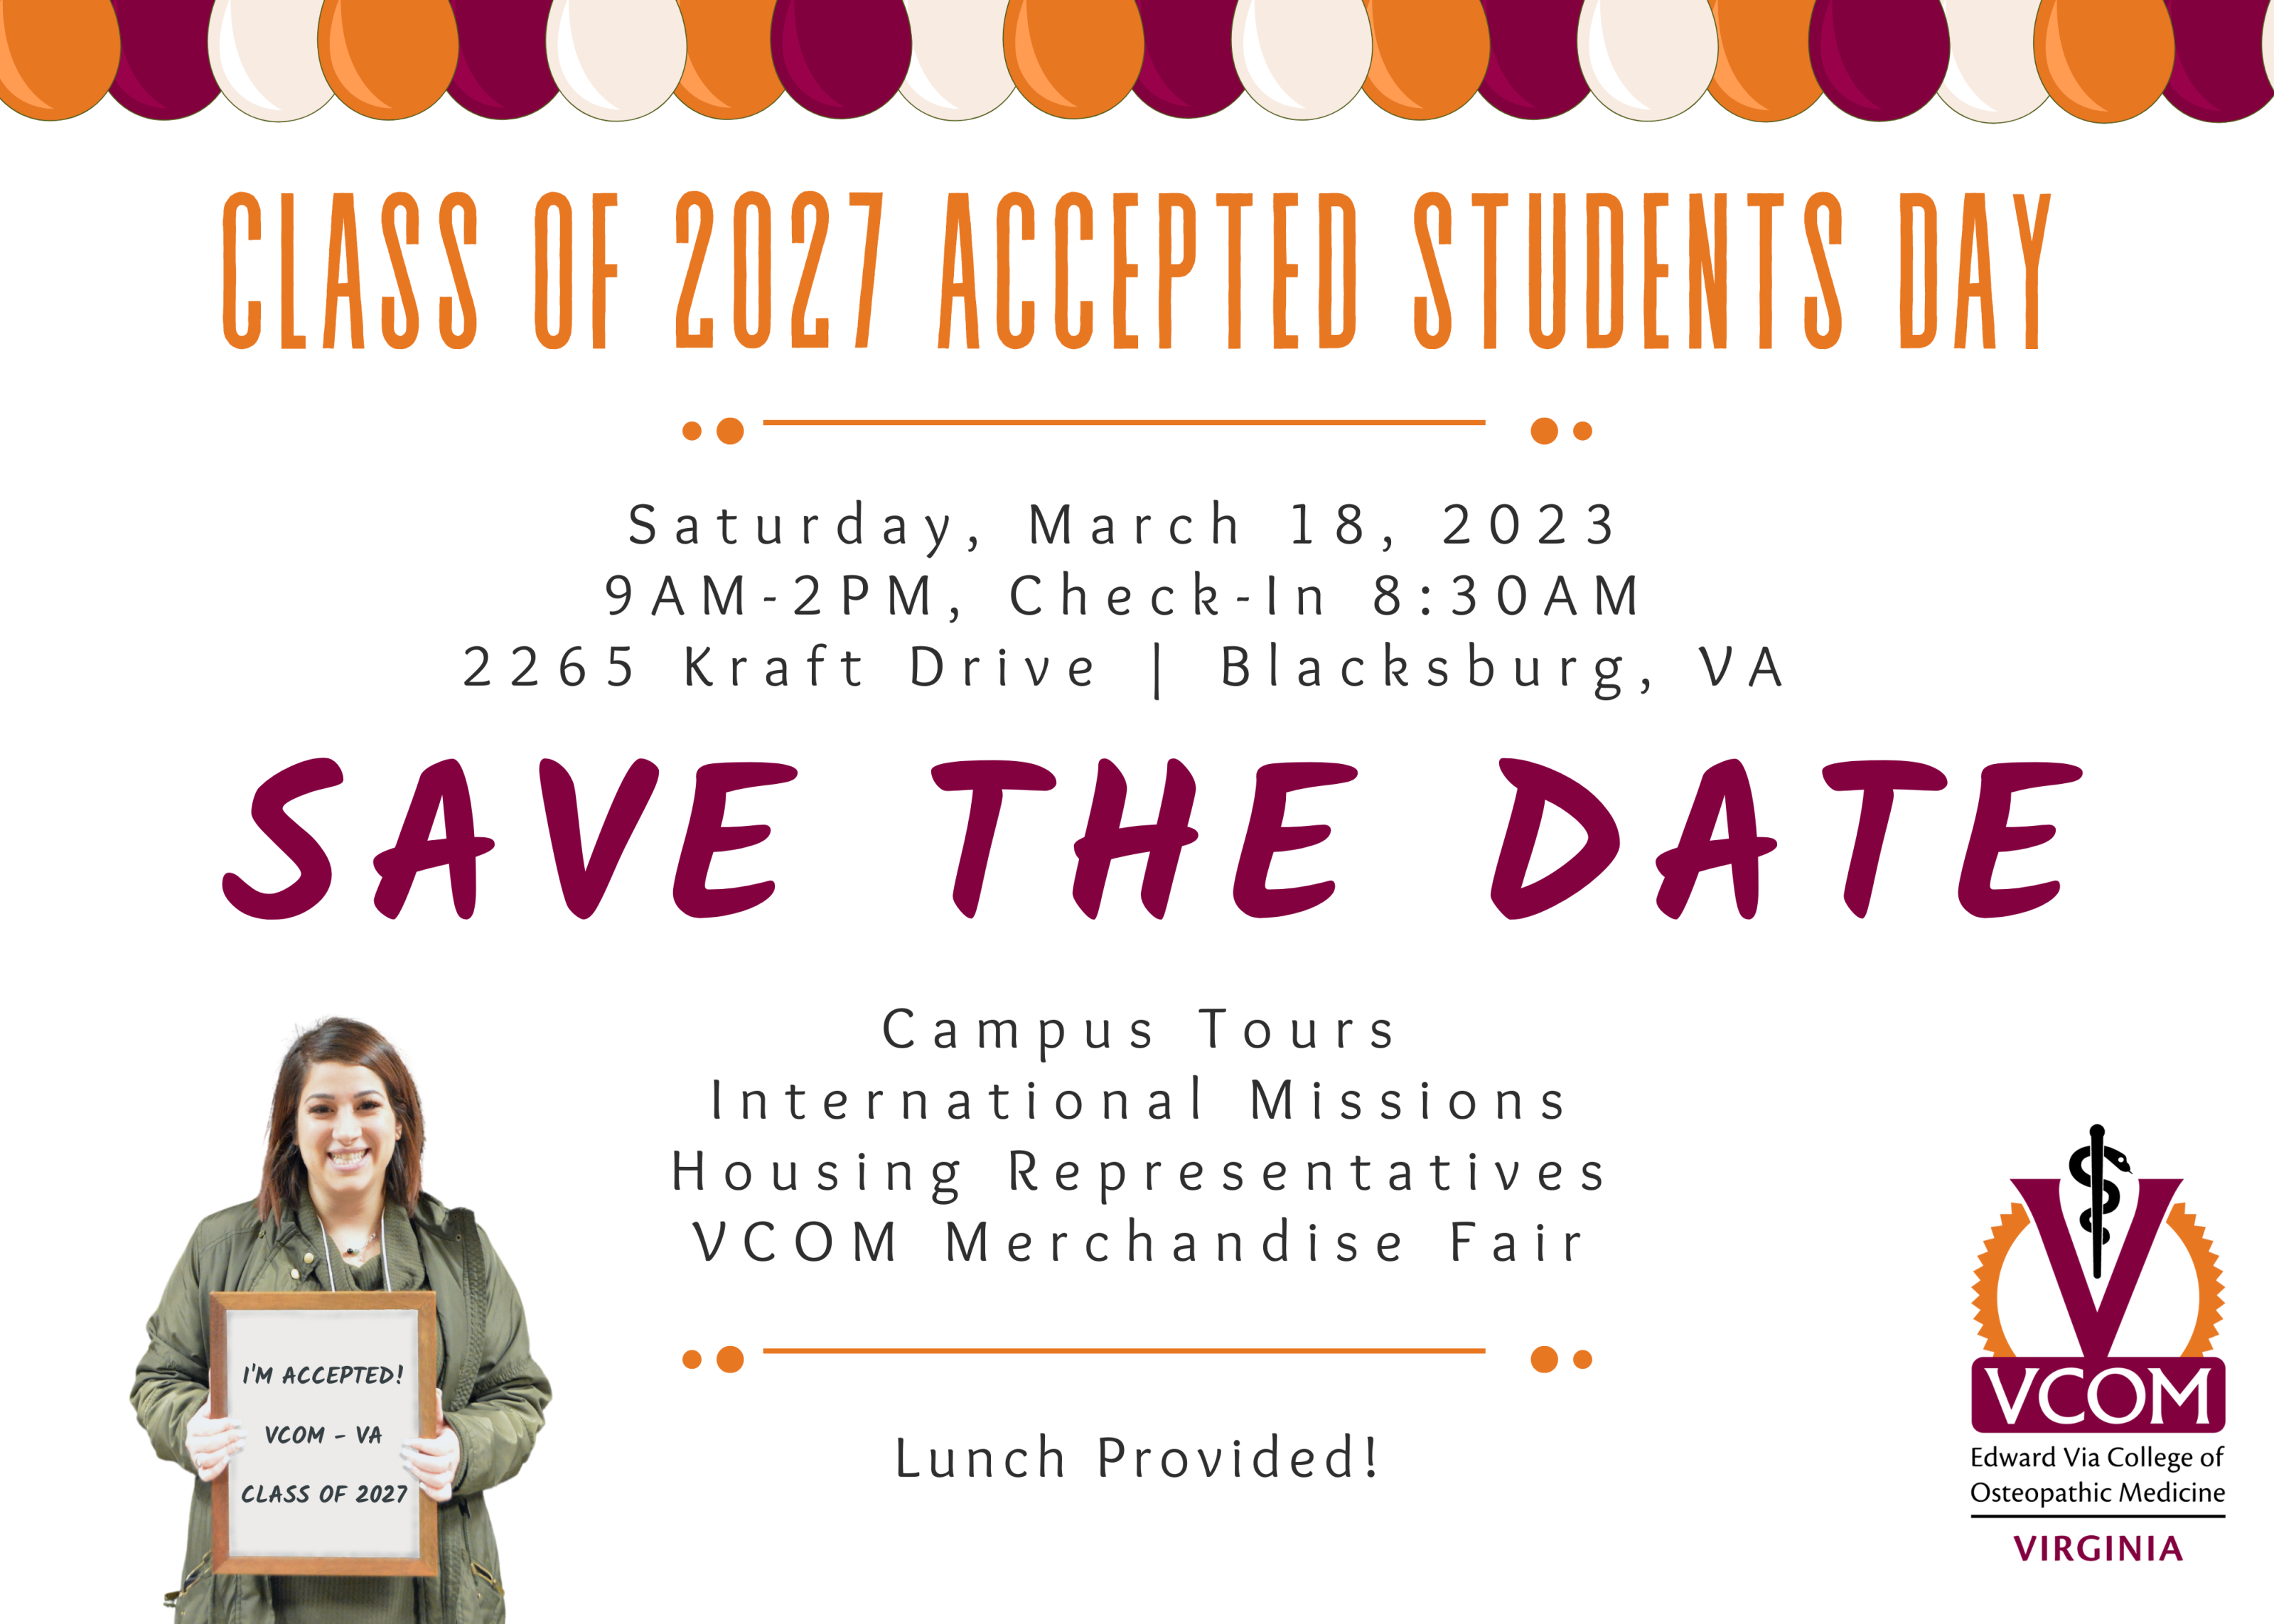 VCOM Virginia Accepted Students Day Flyer 2023